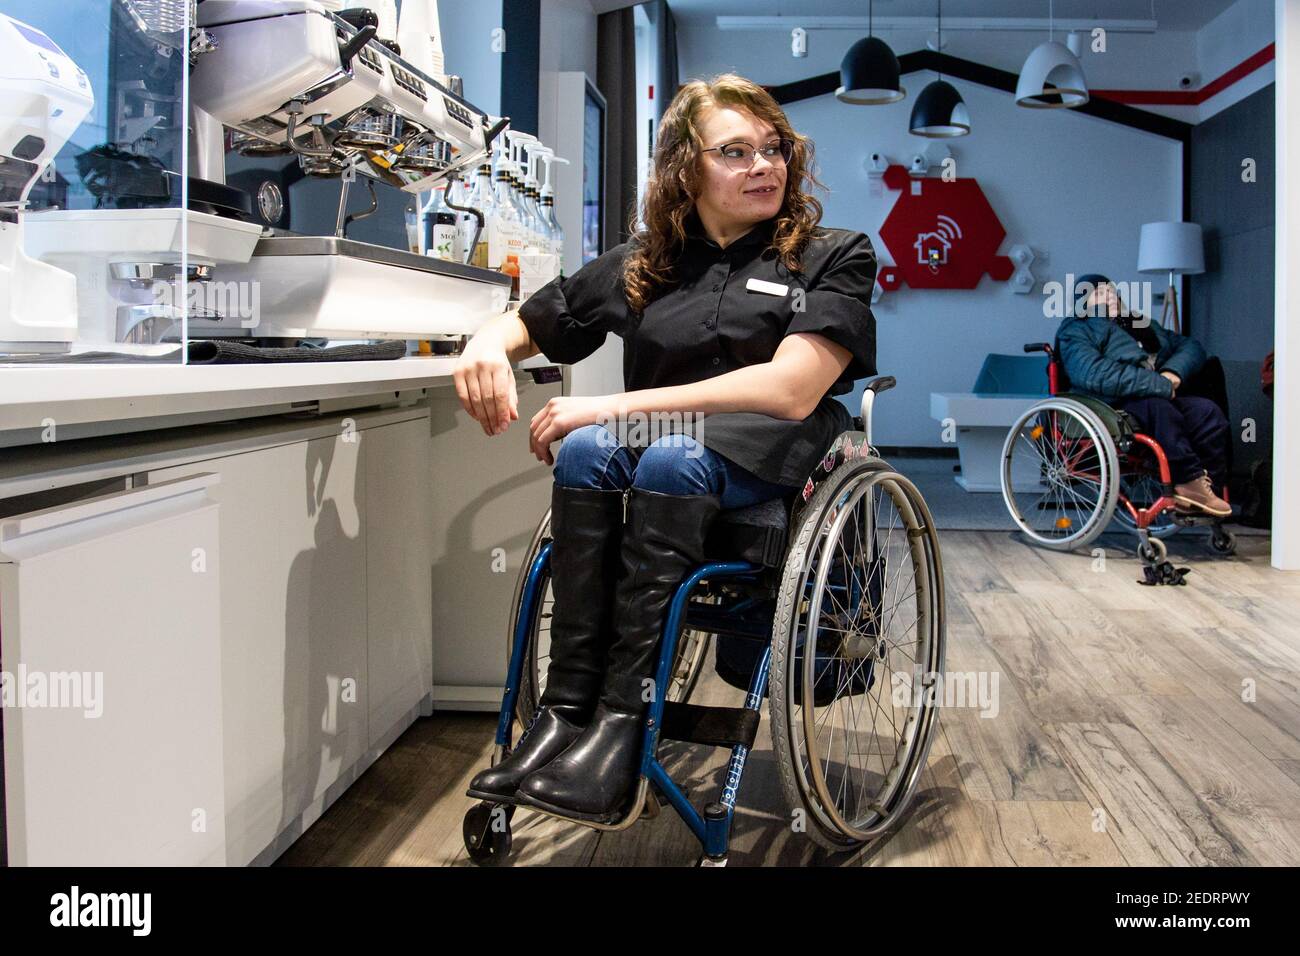 MINSK, BELARUS - January, 2021: Wheelchair disabled person works as a barista in an inclusive coffee shop. This is Natasha Astanina. She is 25 years old. She is a wheelchair user since childhood. The barista works. Has been engaged in sports dancing since the age of 13. He is fond of parachuting. On account of 10 parachute jumps. Stock Photo